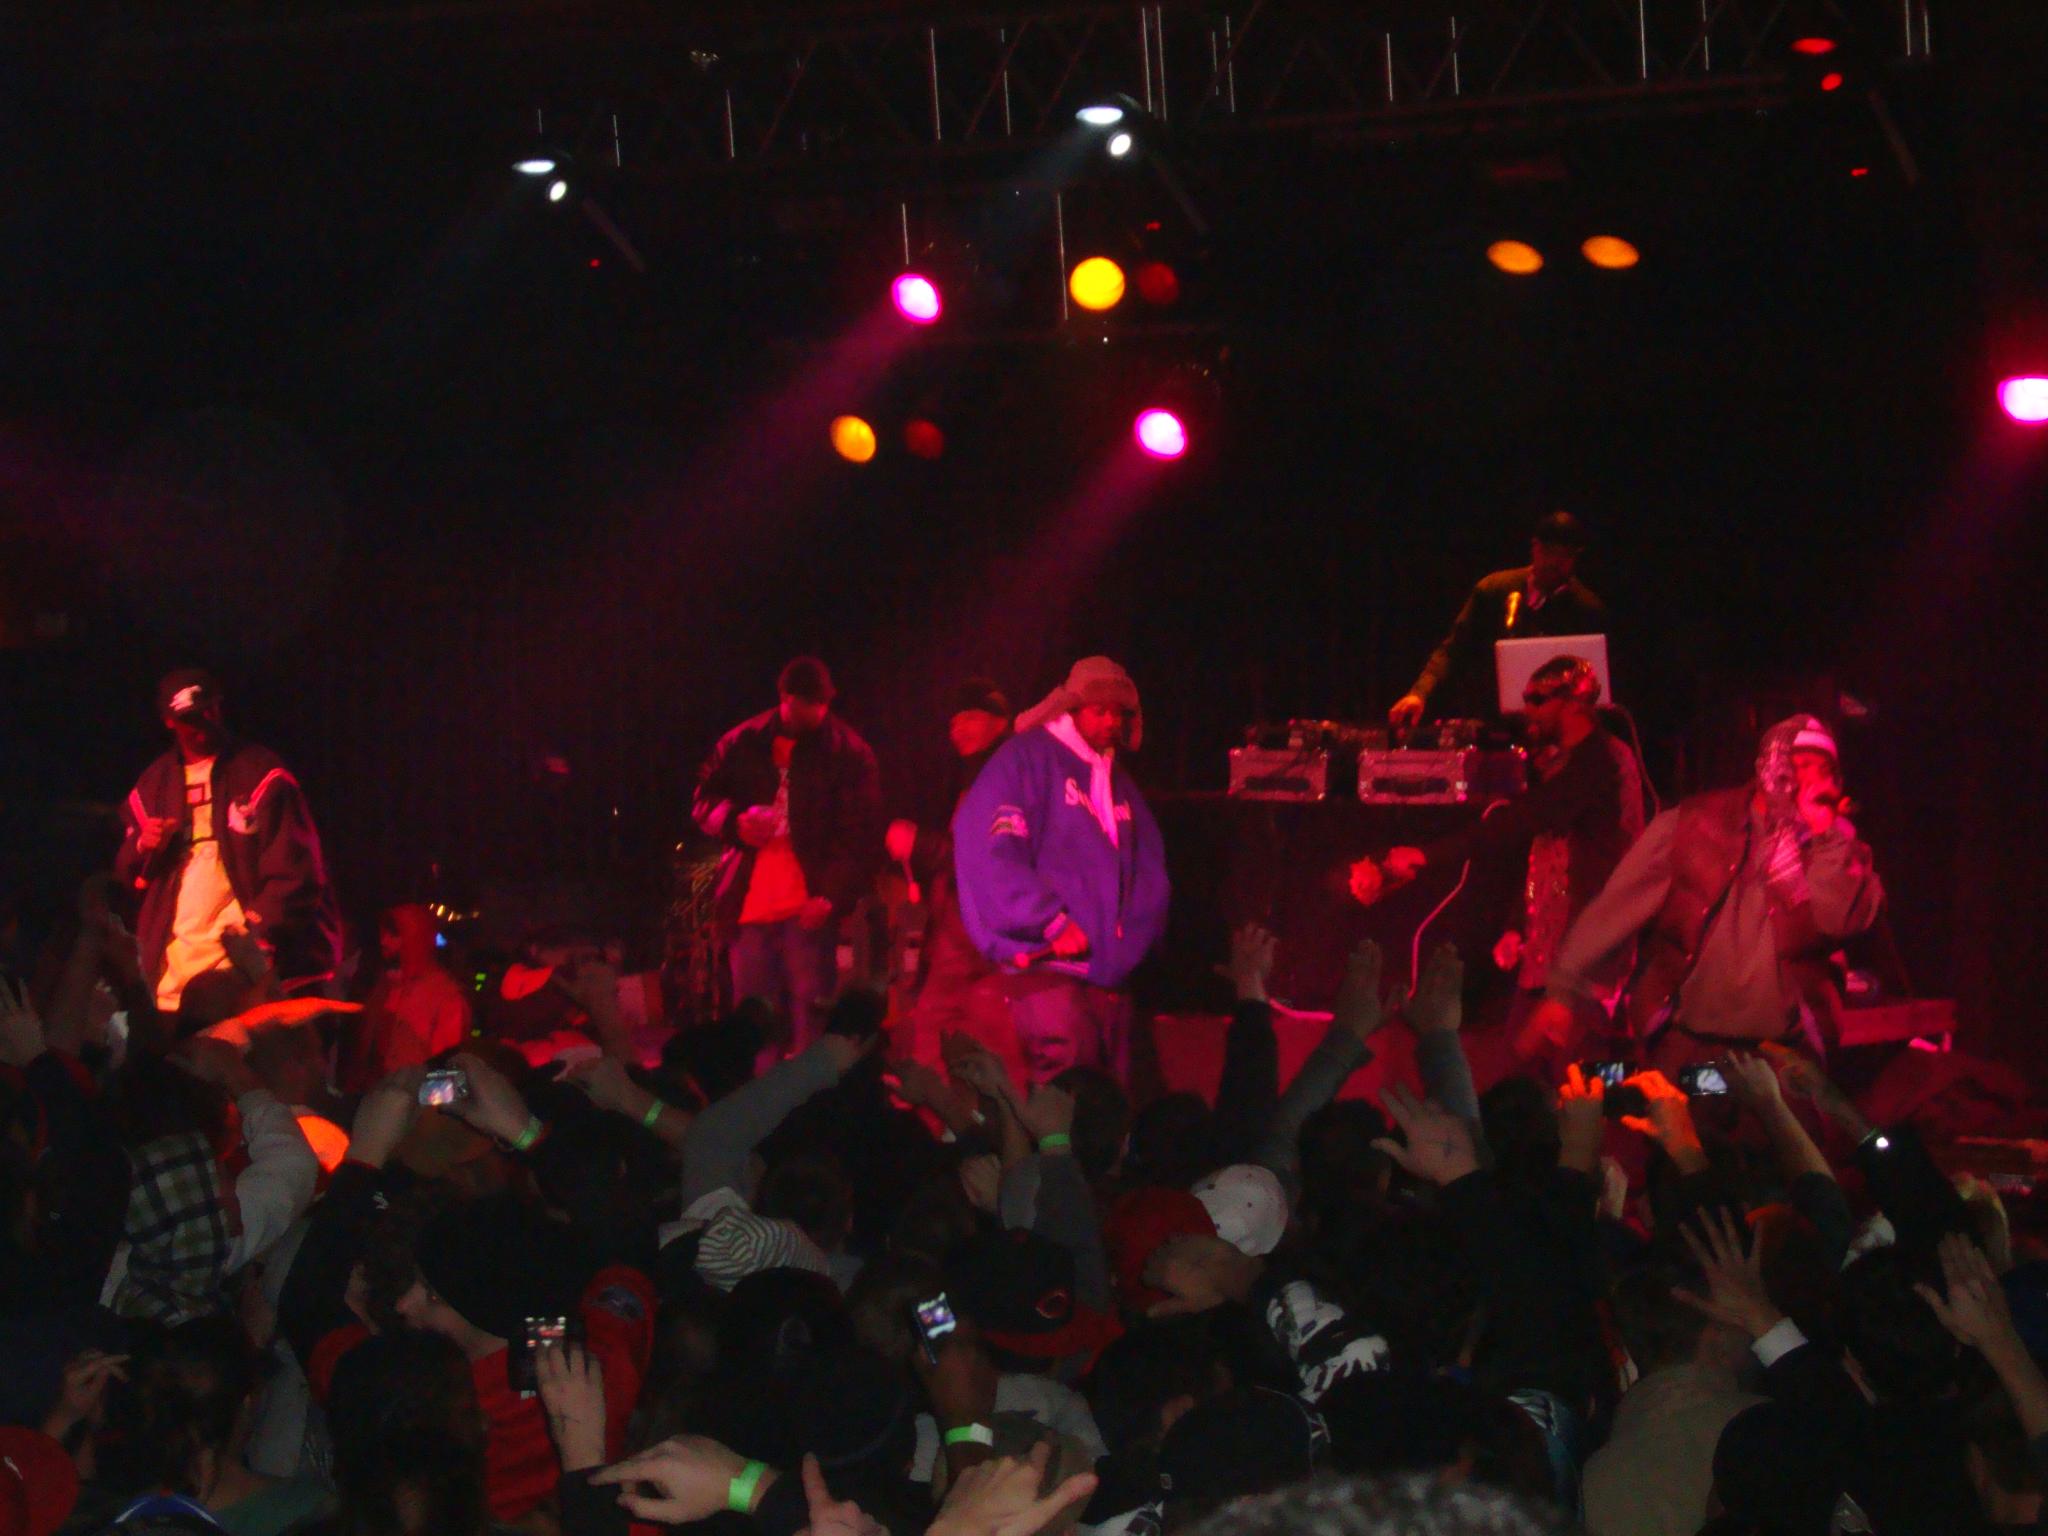 a concert scene with people standing in the middle on stage